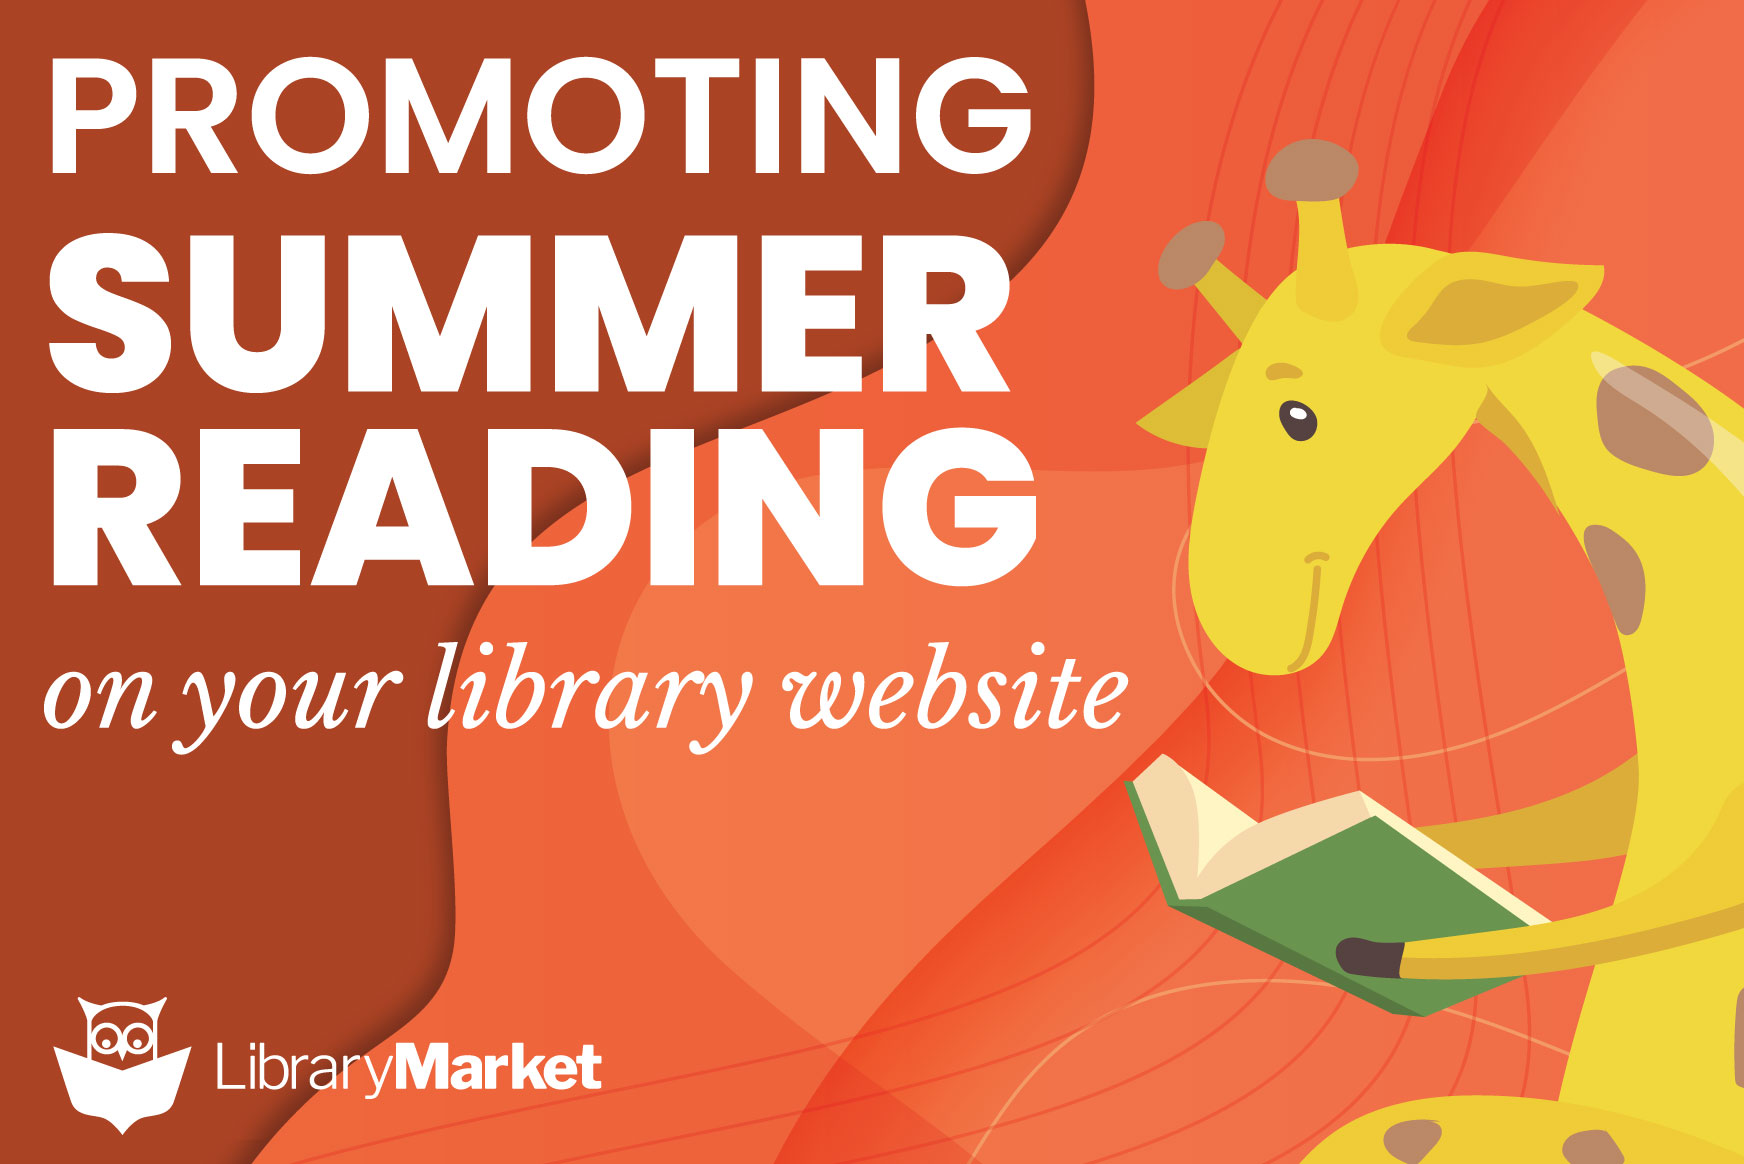 Promoting Summer Reading on Your Library Website - FREE DOWNLOADS!